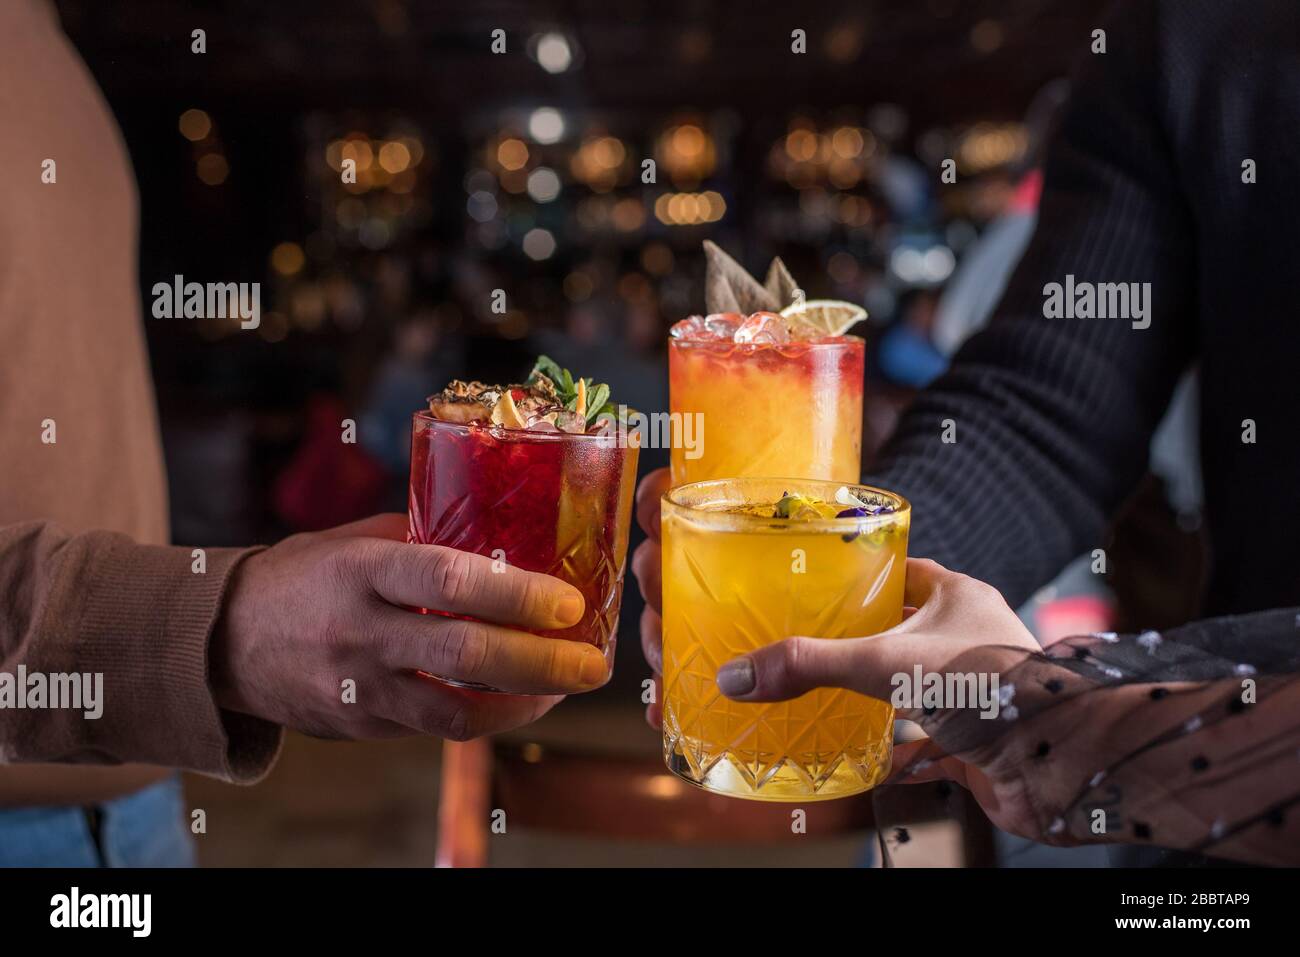 friends,cheers,cocktail,service,bar,drinks,retaurant,lifestyle,hands,glasses,mixology,hospitality,pub,art,dinner,party,night,celebration,anniversary,g Stock Photo